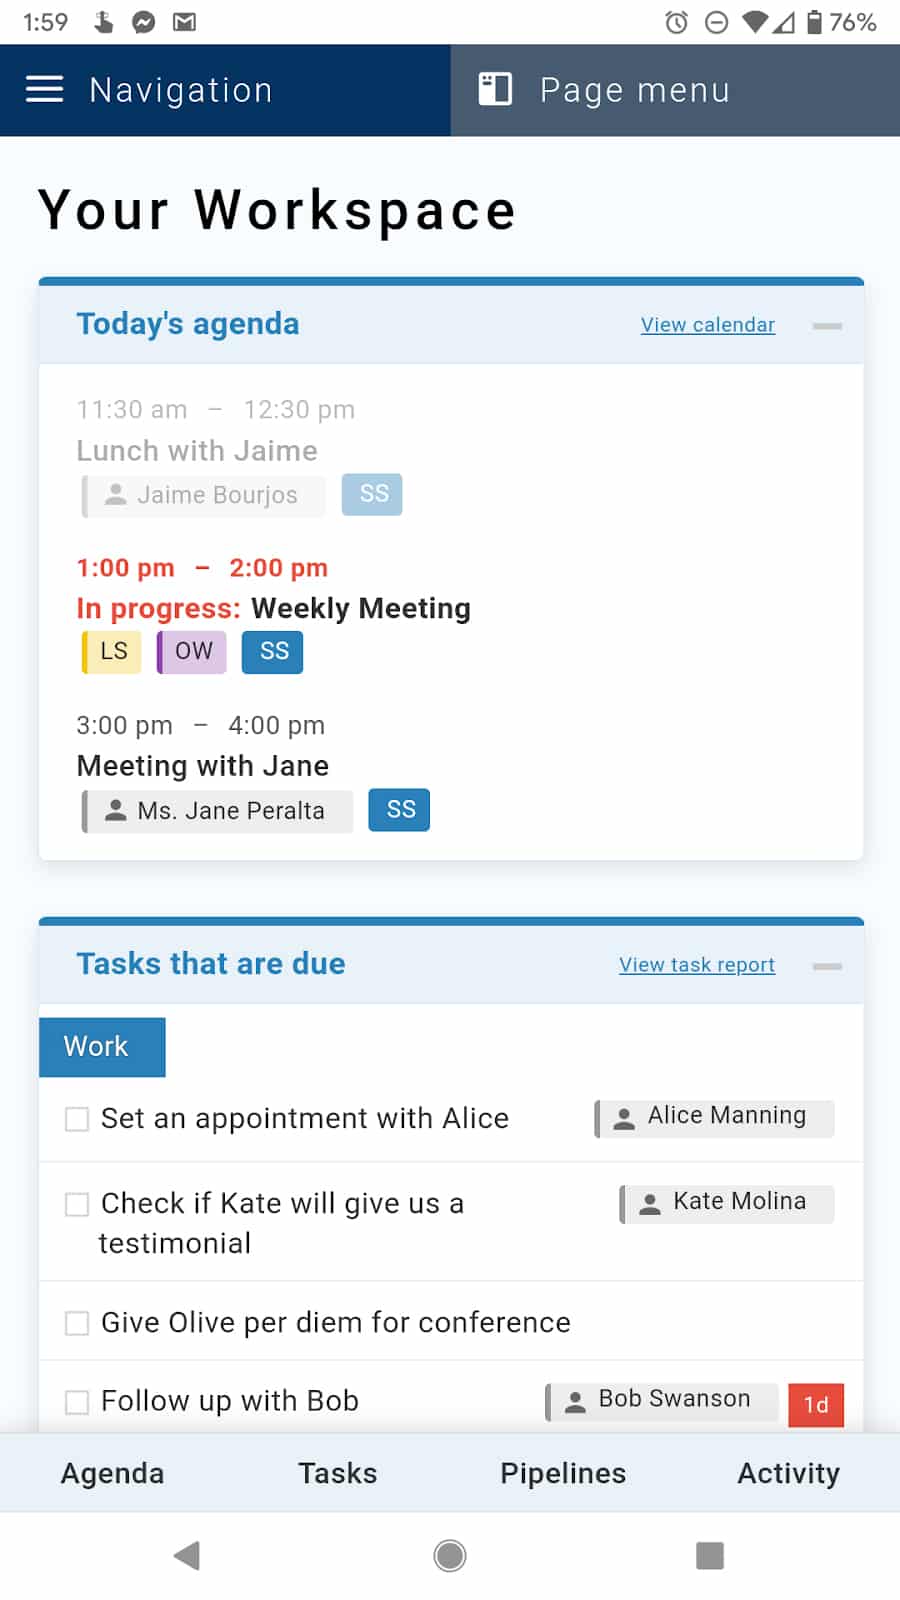 Image of Less Annoying CRM’s workspace page in on mobile.